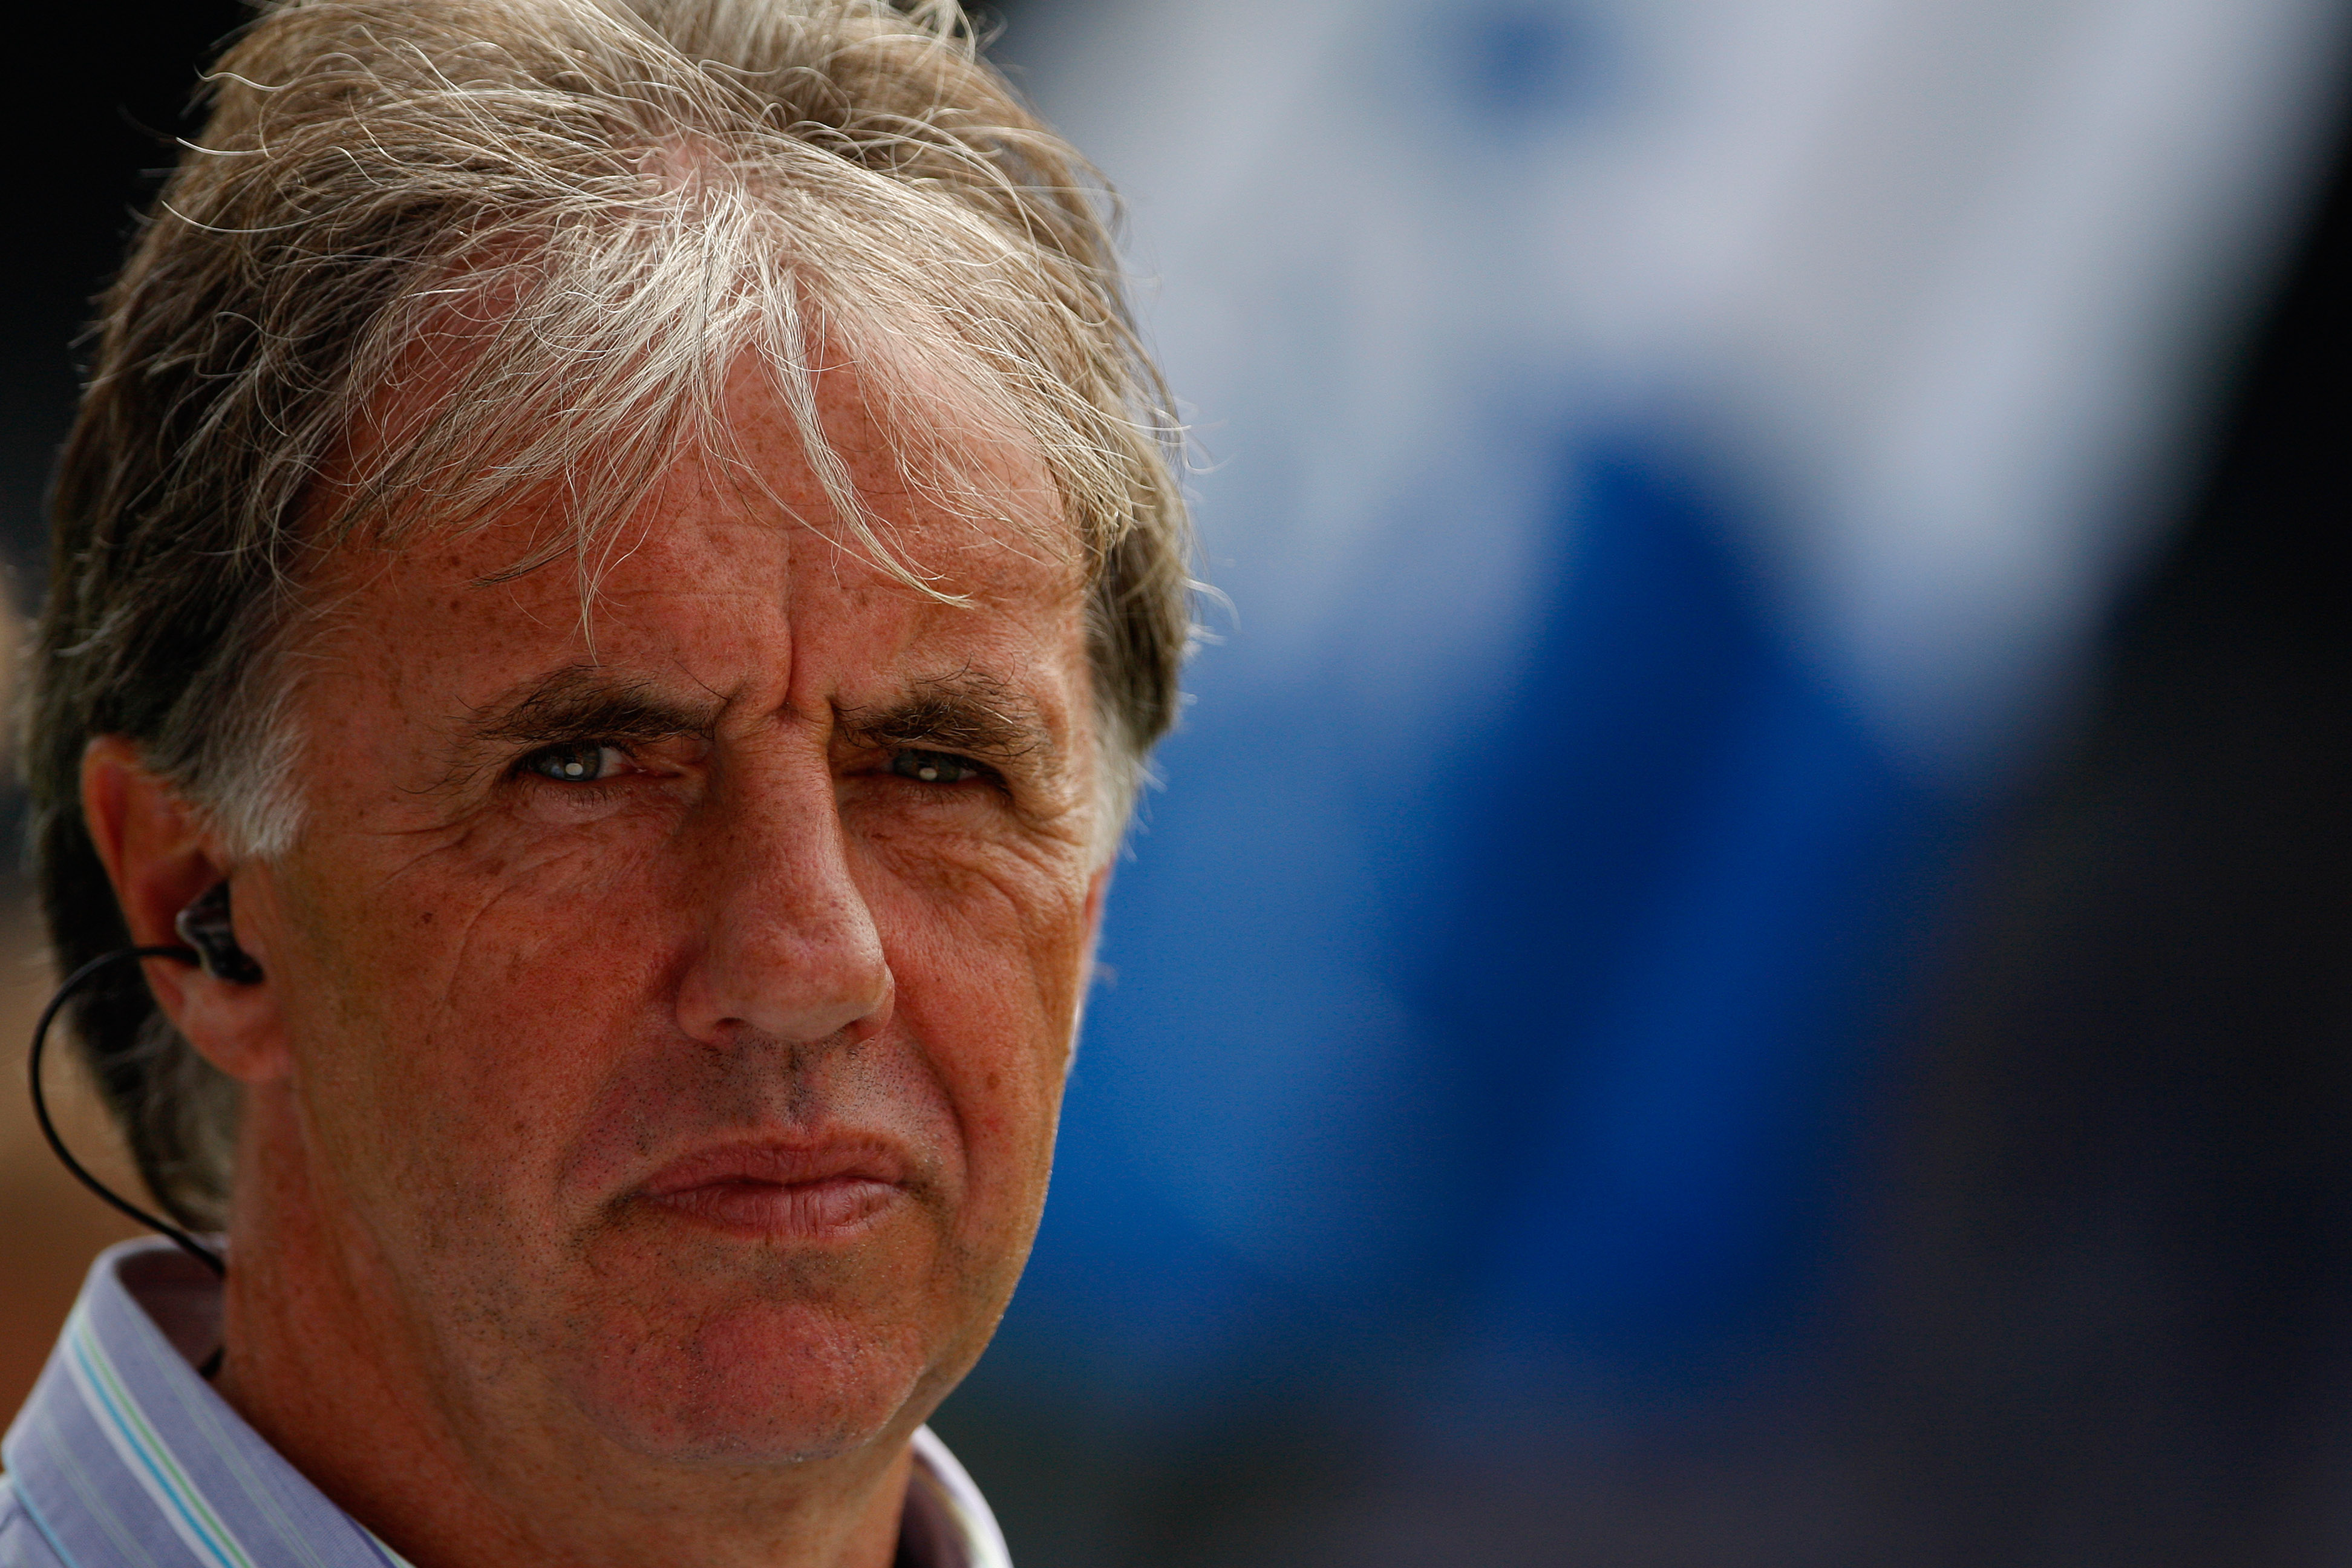 Lawrenson suggests Liverpool may need to be ‘patient’ at Wembley and predicts ‘extremely close’ Carabao Cup final clash with Chelsea